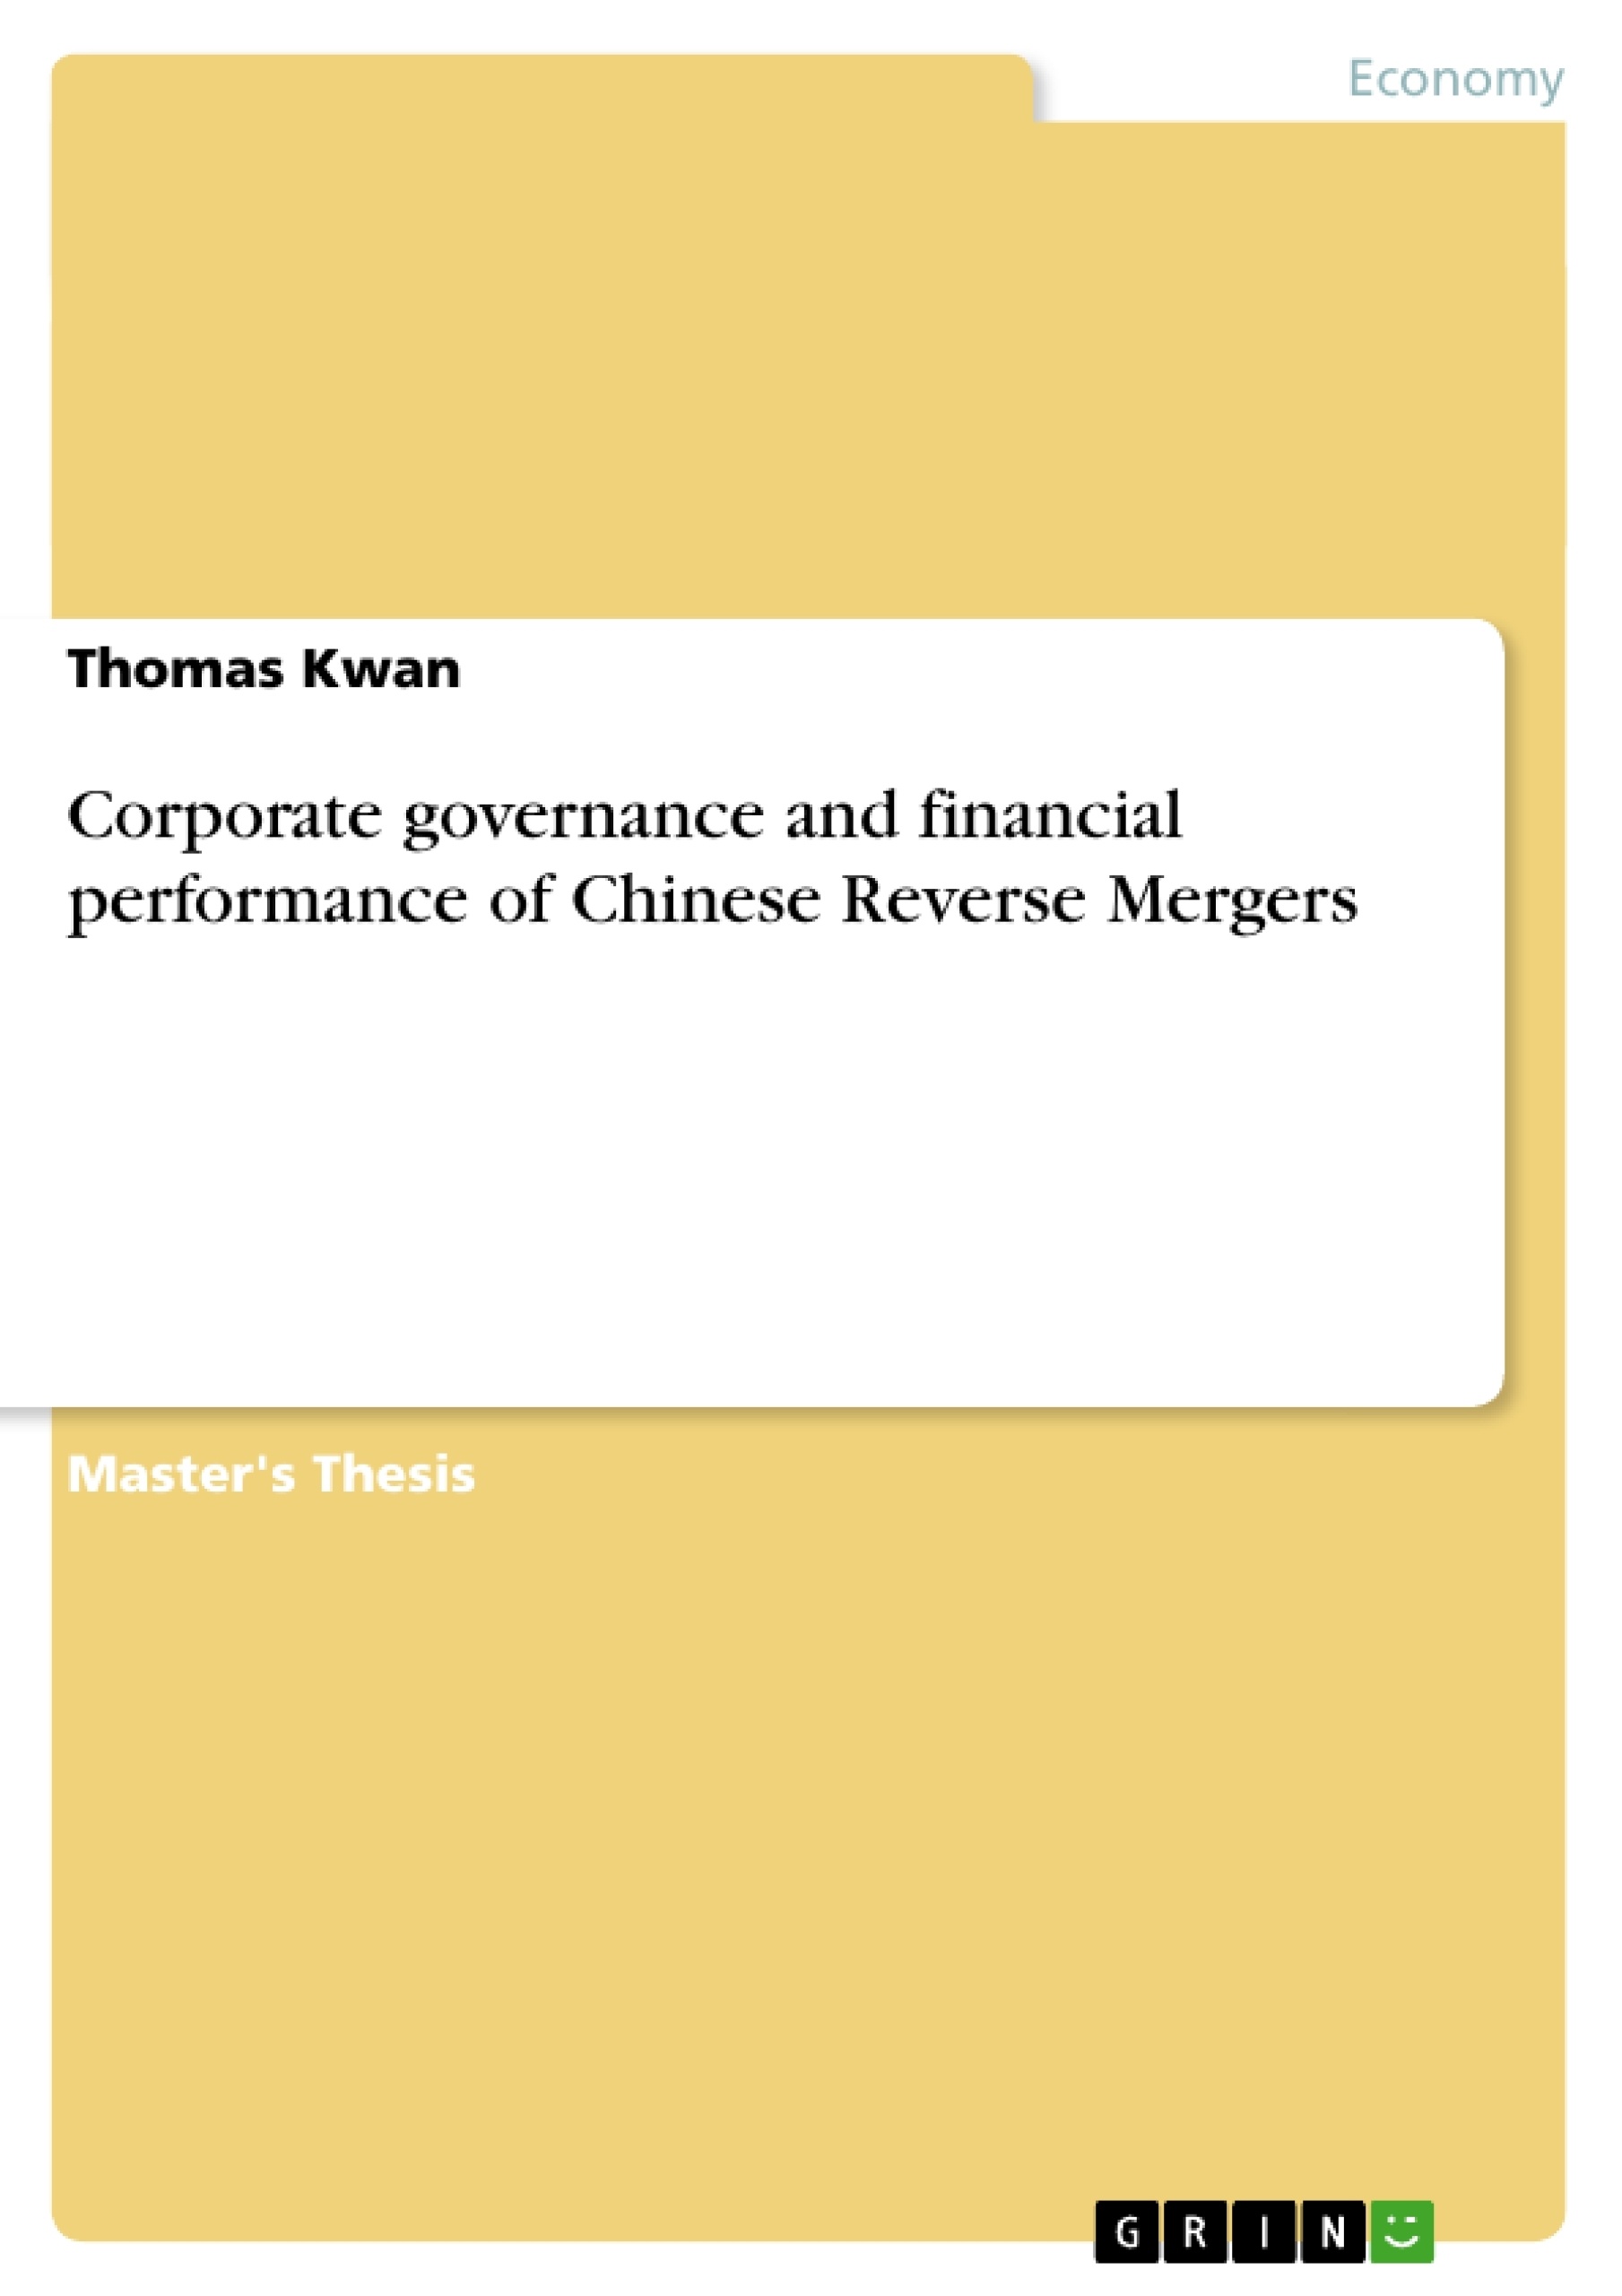 Title: Corporate governance and financial performance of Chinese Reverse Mergers